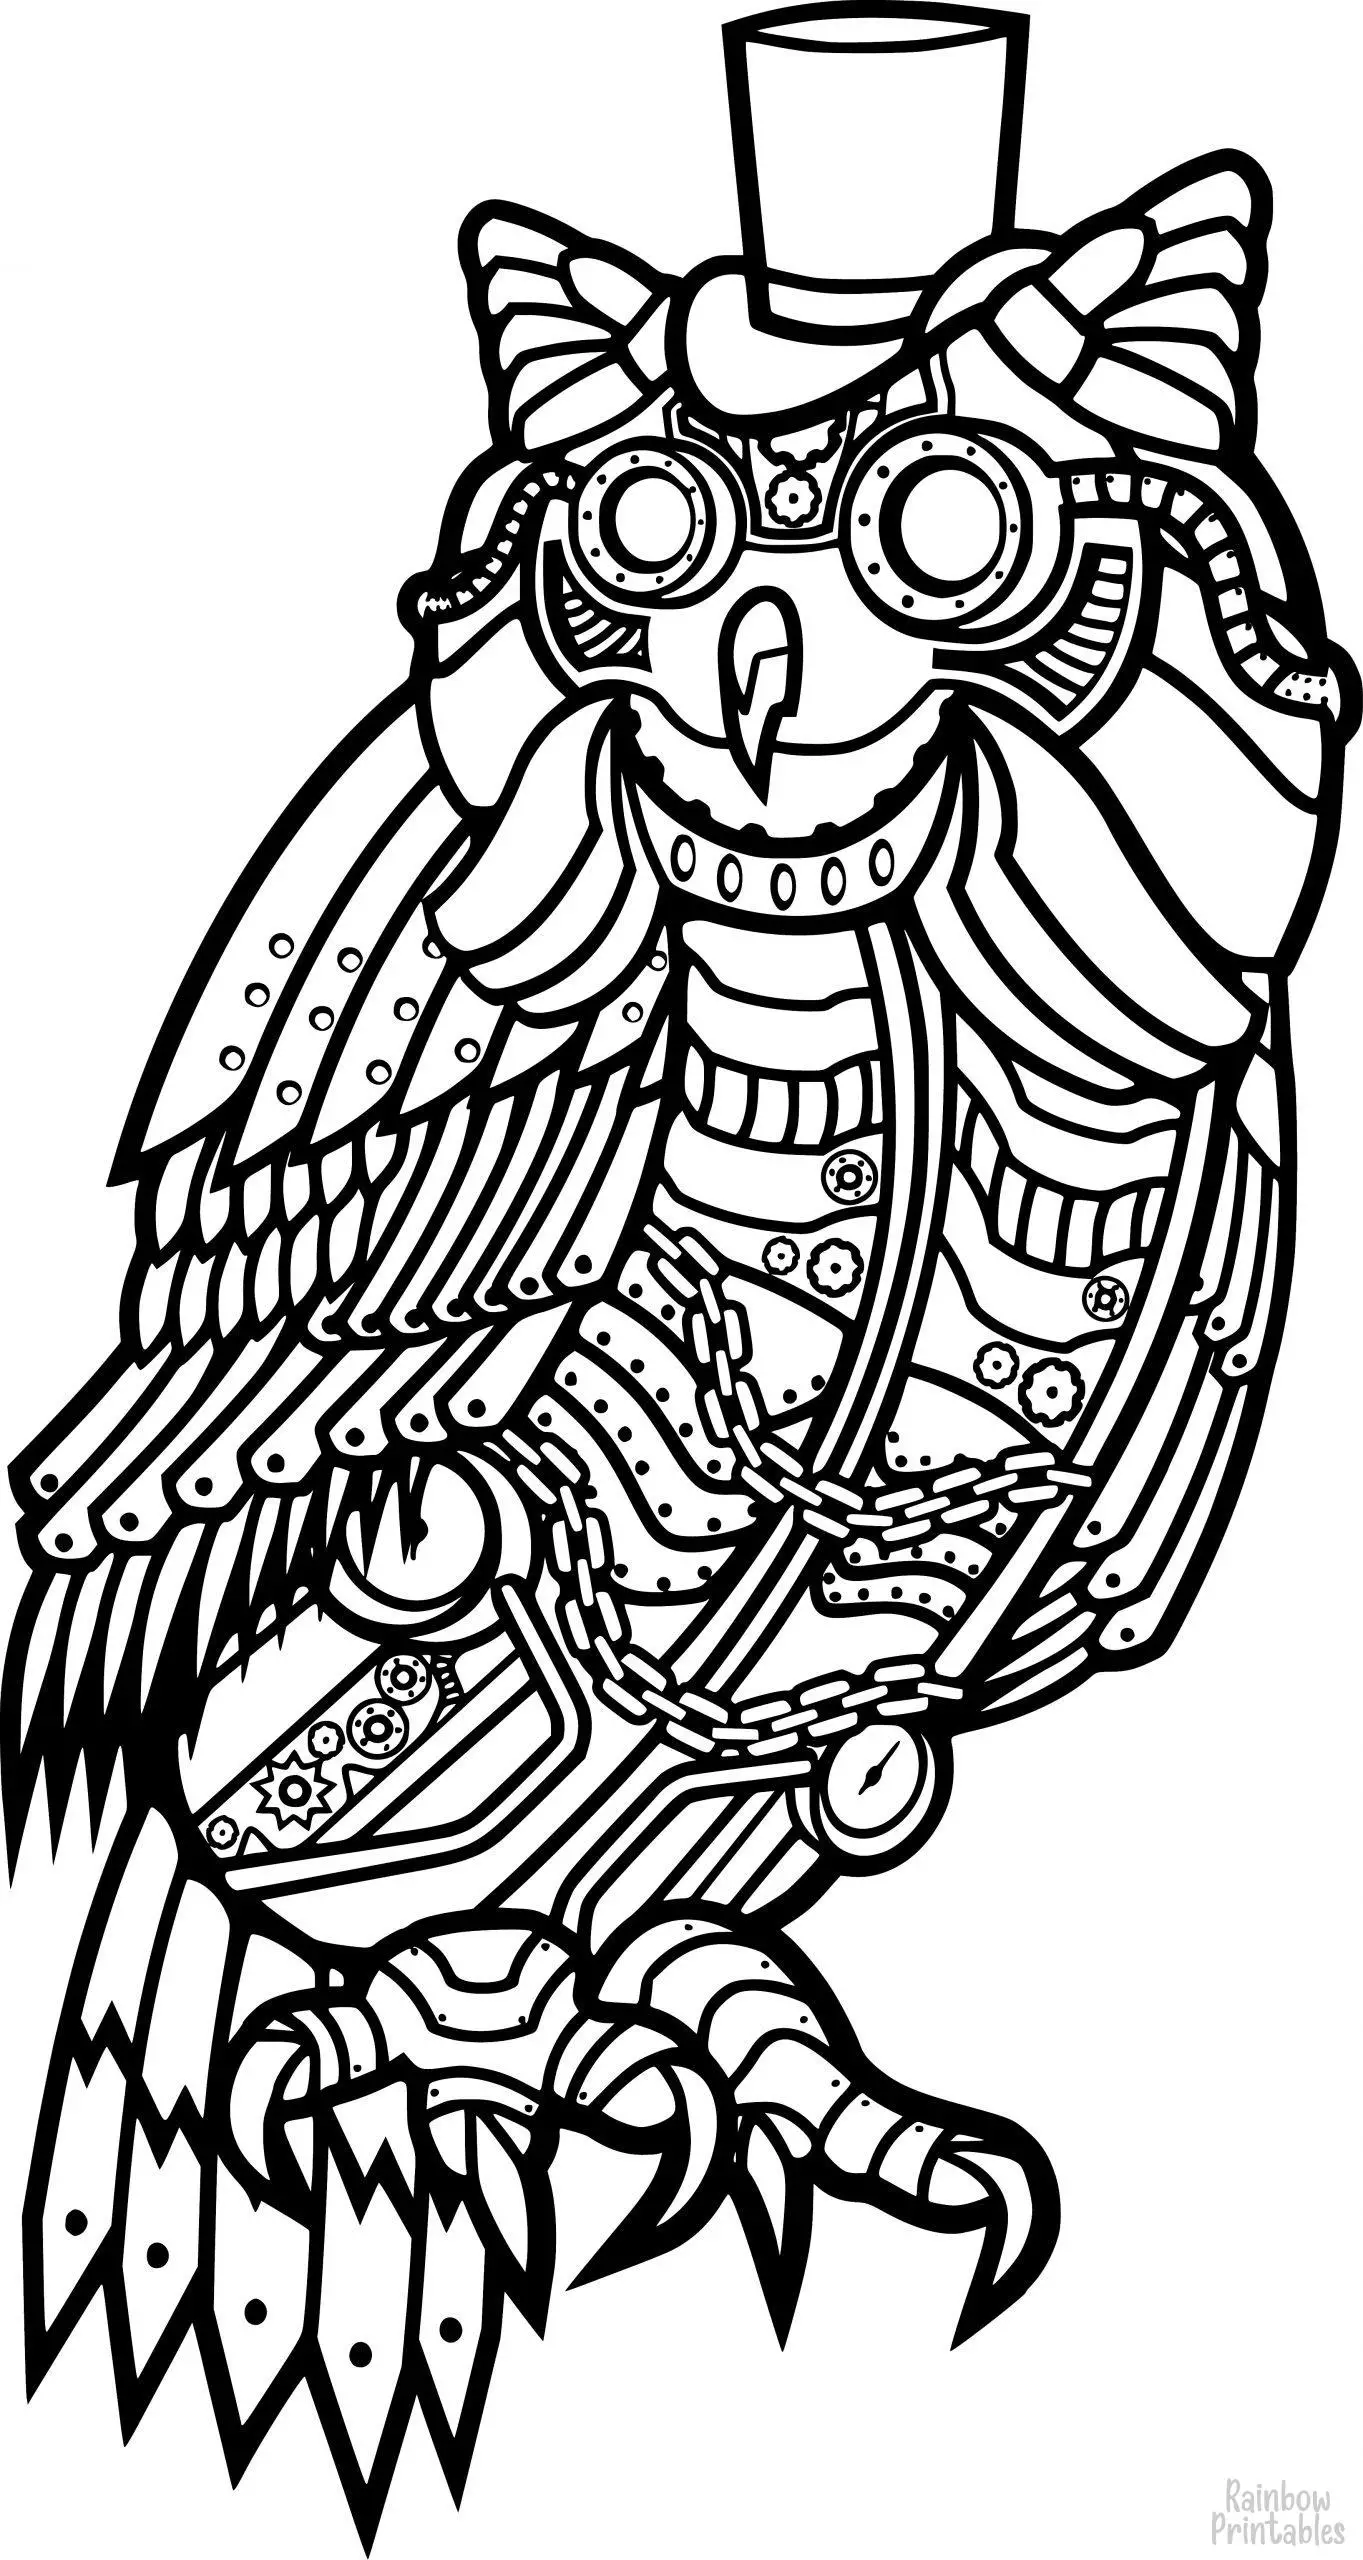 ROBOT OWL Steampunk Style Coloring Pages for Kids Adults Art Activities Line Art